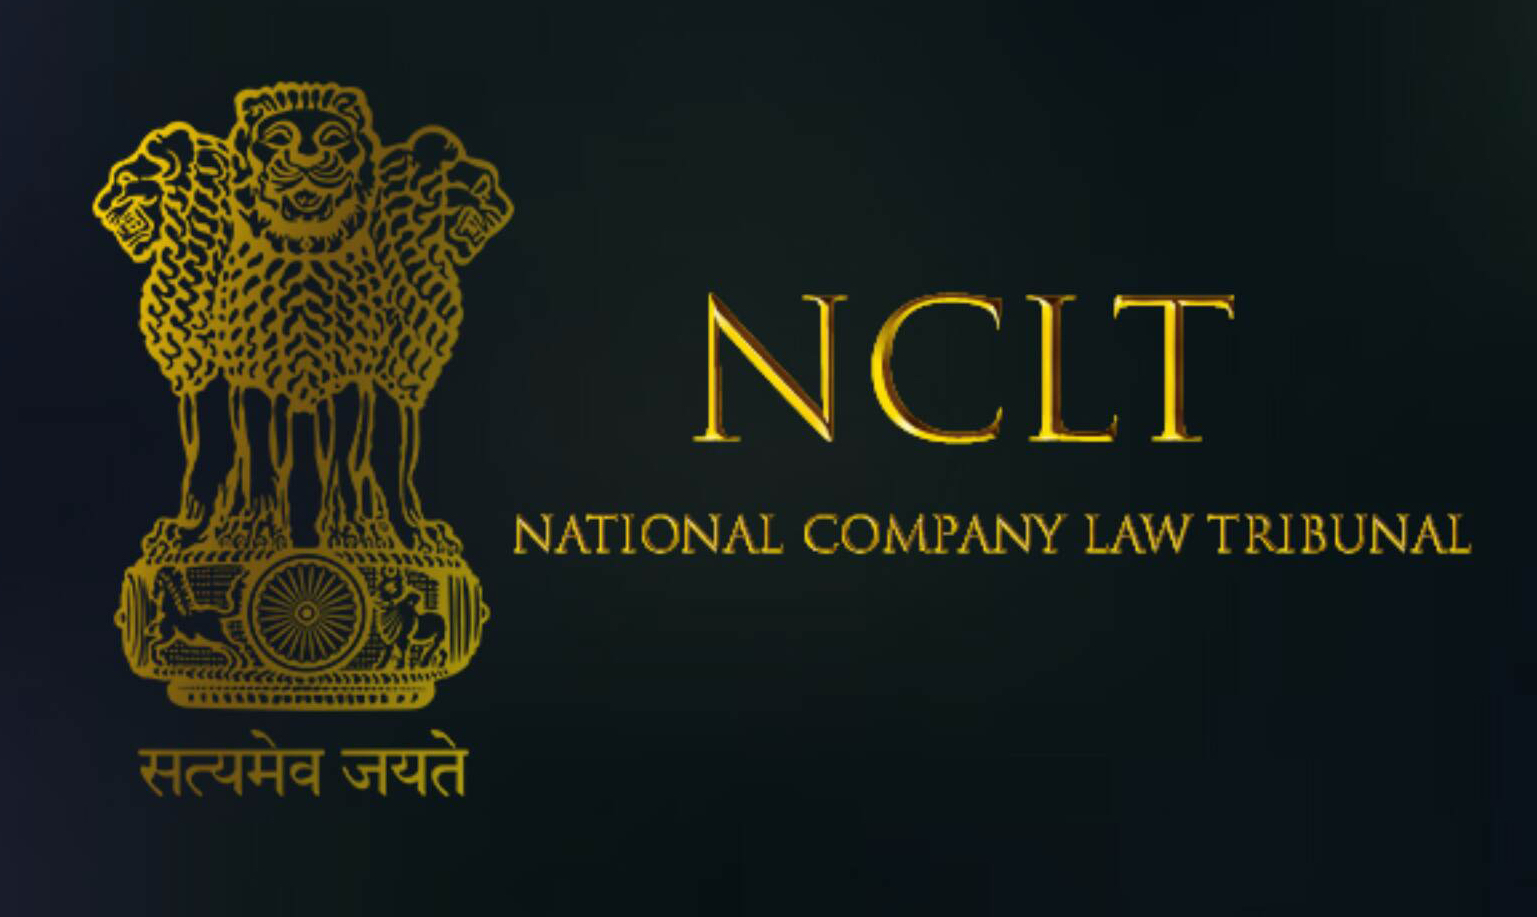 Necessary reforms to achieve efficiency in the working of NCLT - iPleaders